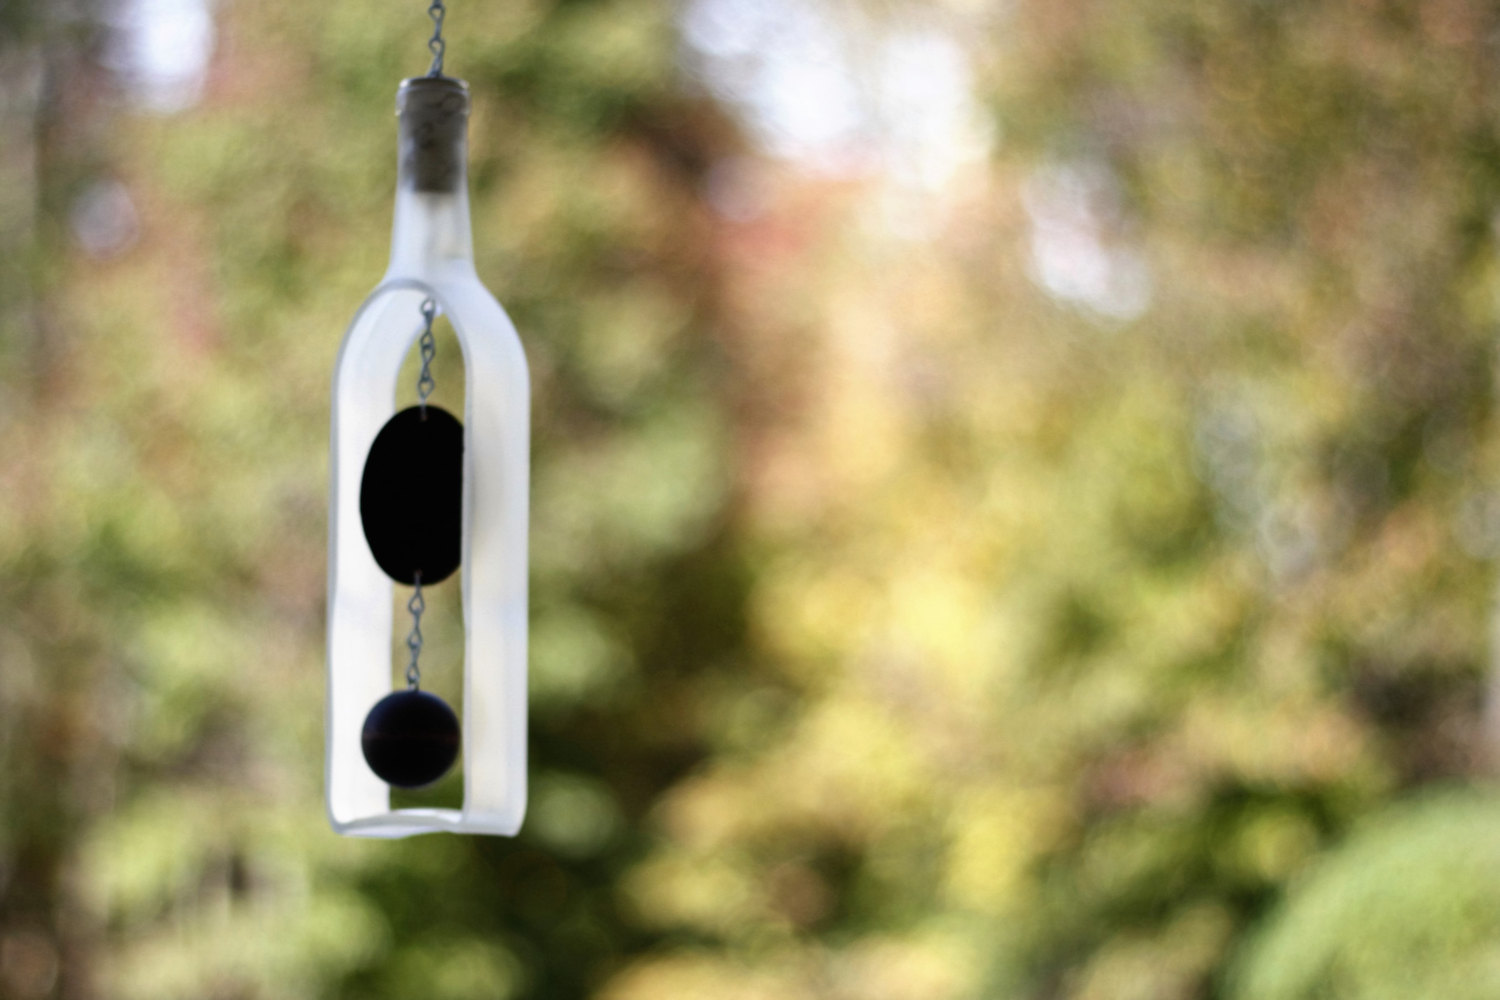 16 Wild Handmade Wind Chime Designs Your Garden Needs To Have Right Now